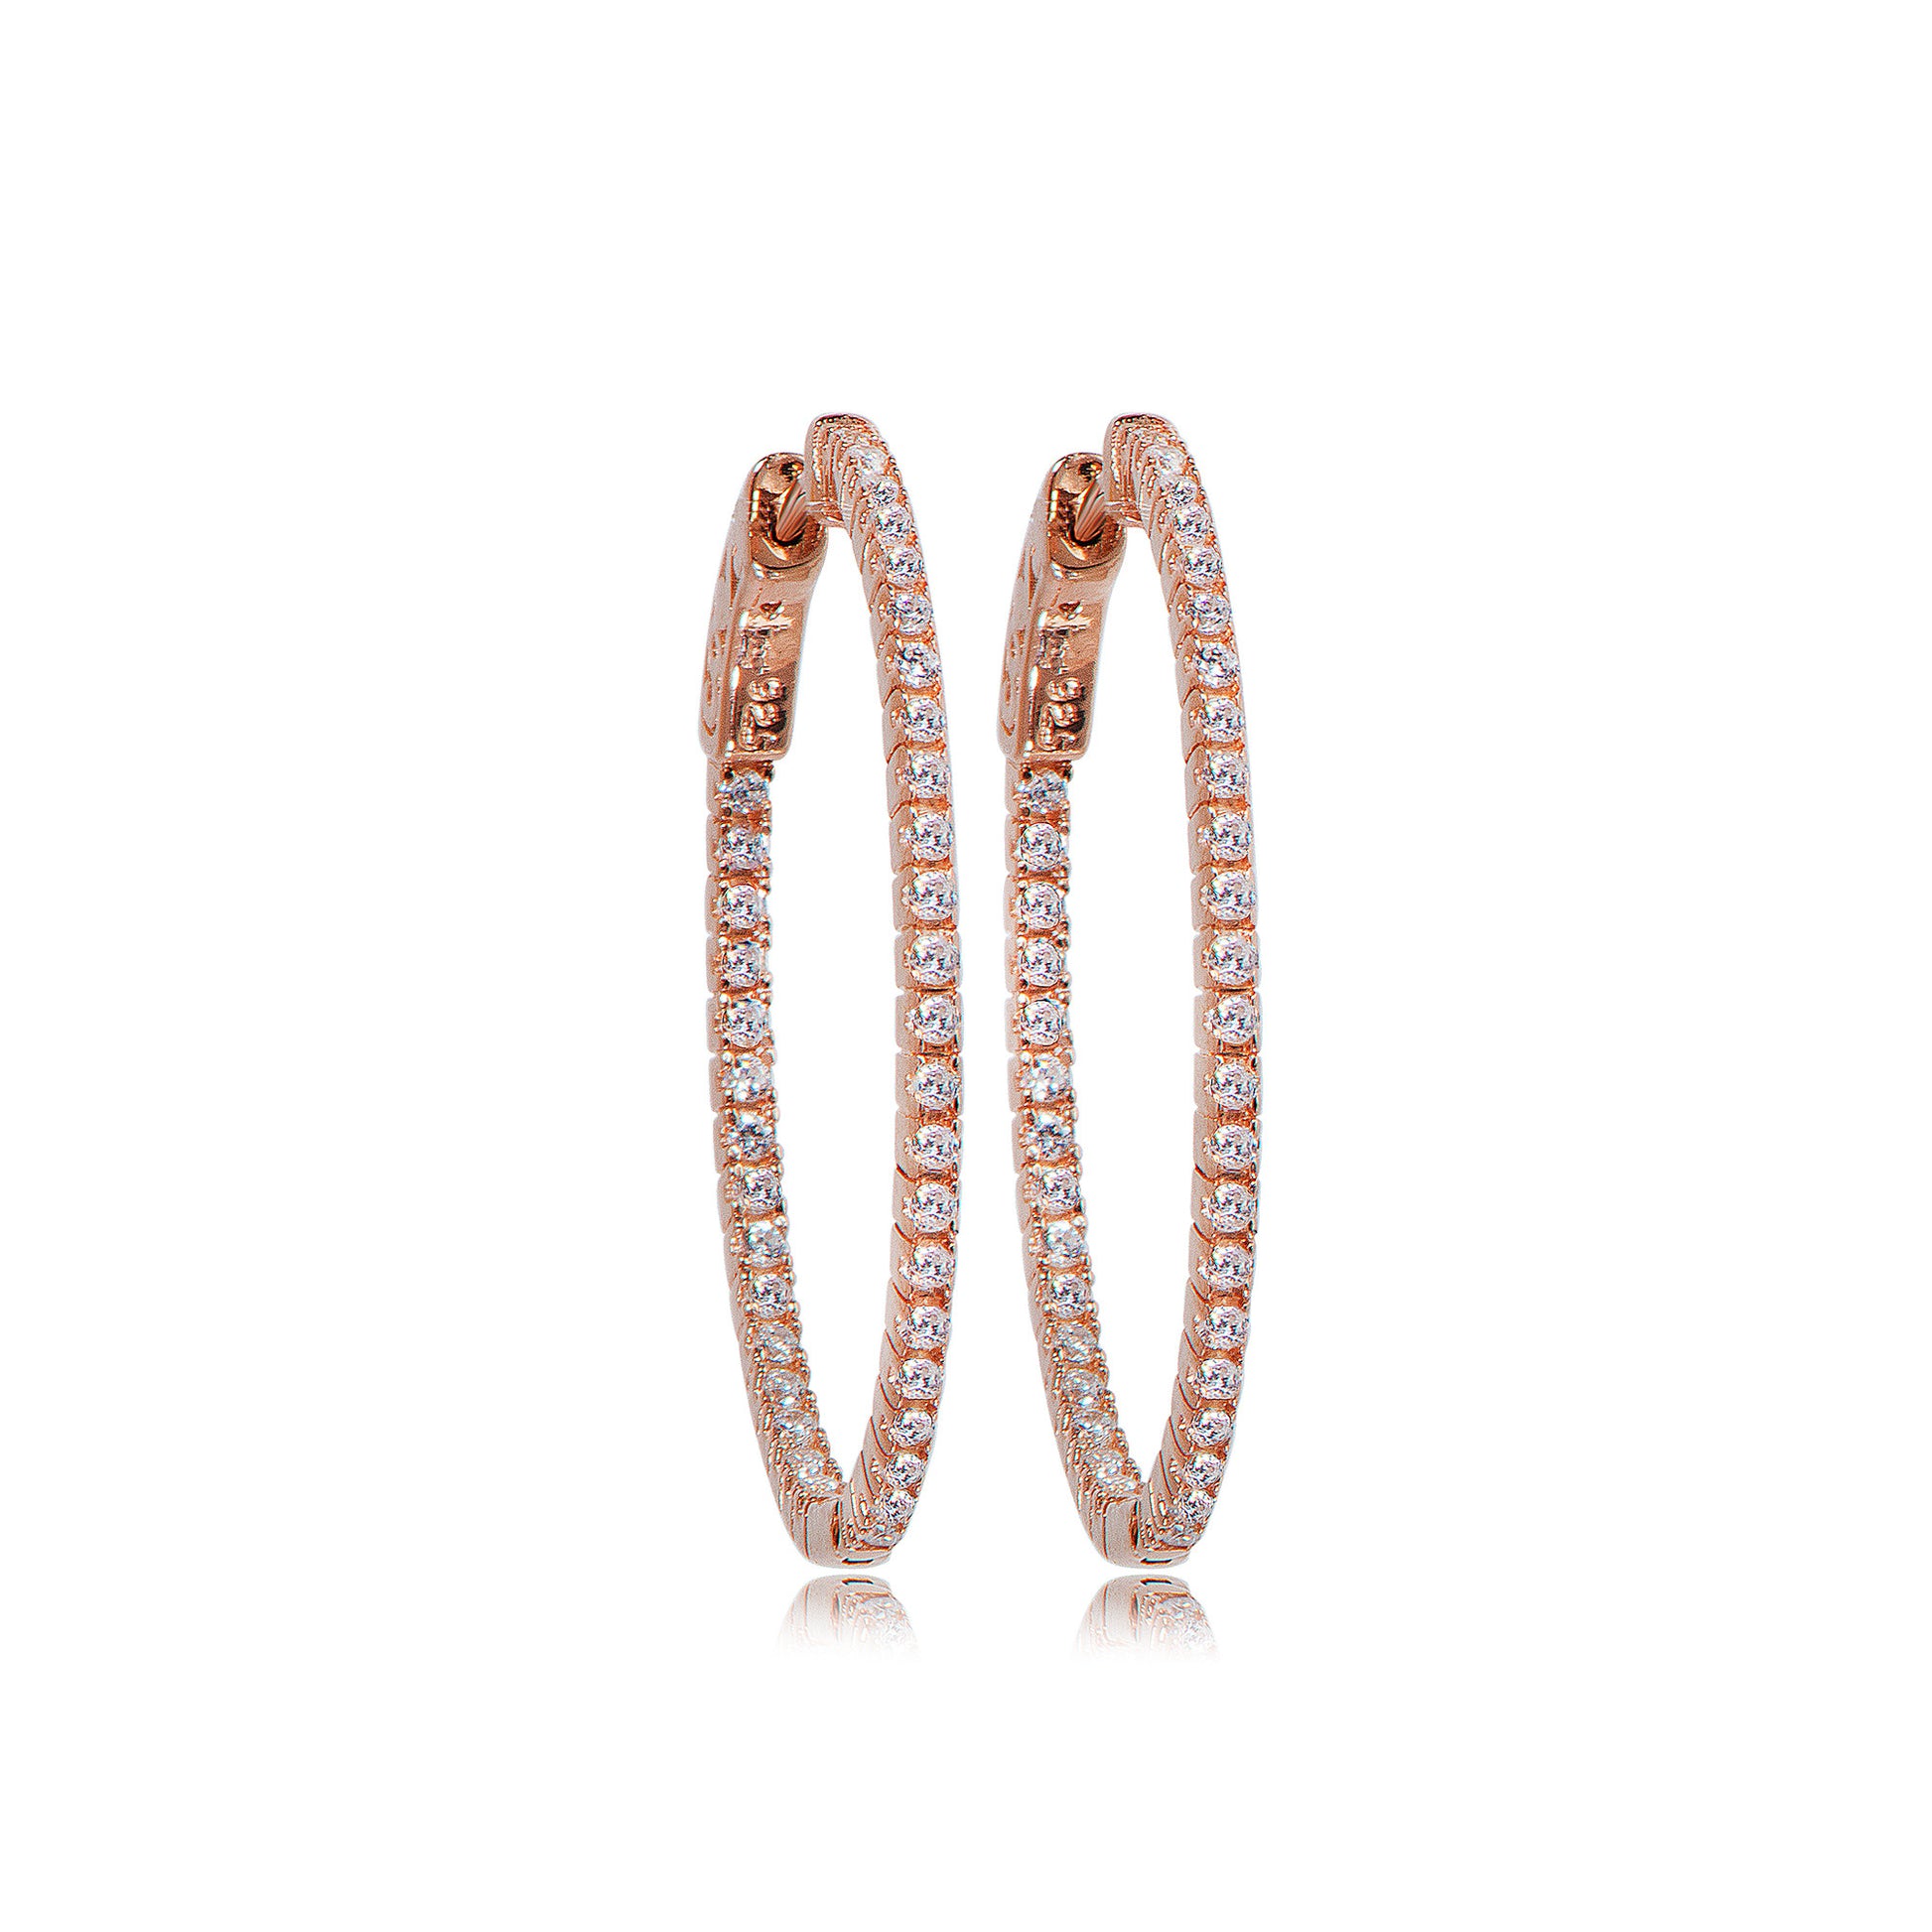 
A pair of rose gold plated silver hoop earrings encrusted with Cubic Zirconia stones, showcasing a special safety lock.

